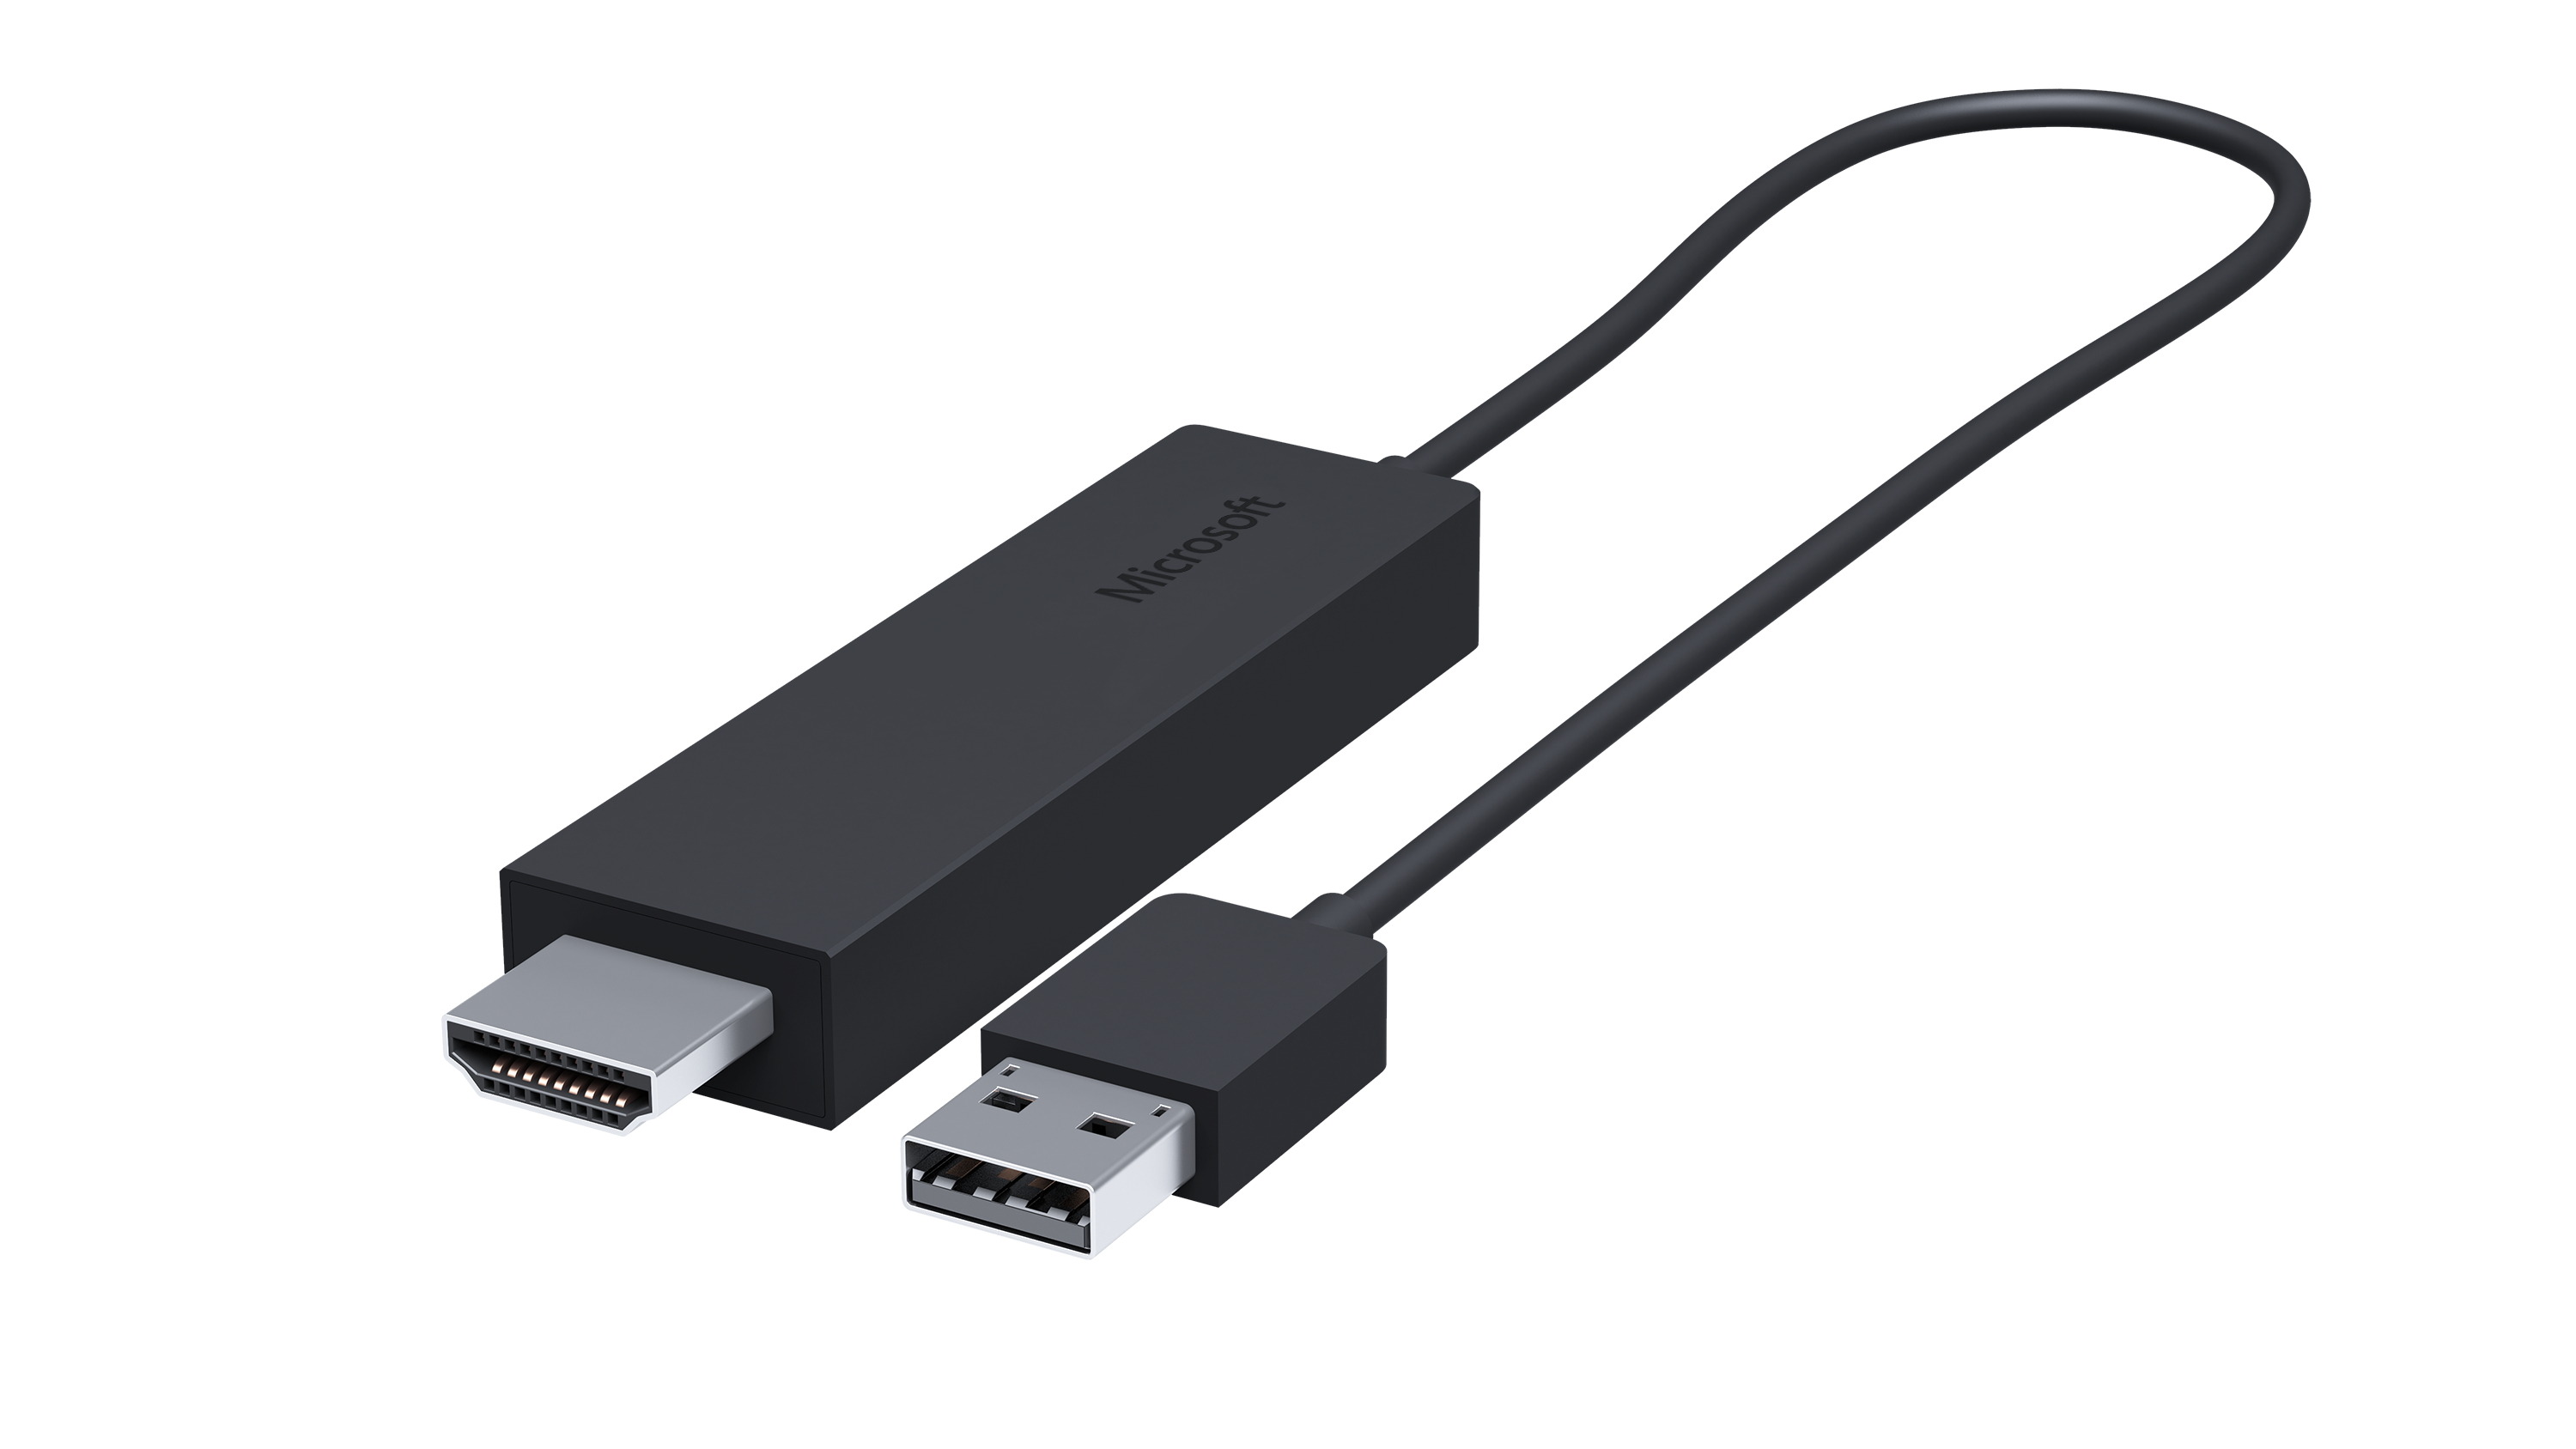 New Wireless Display Adapter V2 receiver HDMI &USB Ports Required for Microsoft 